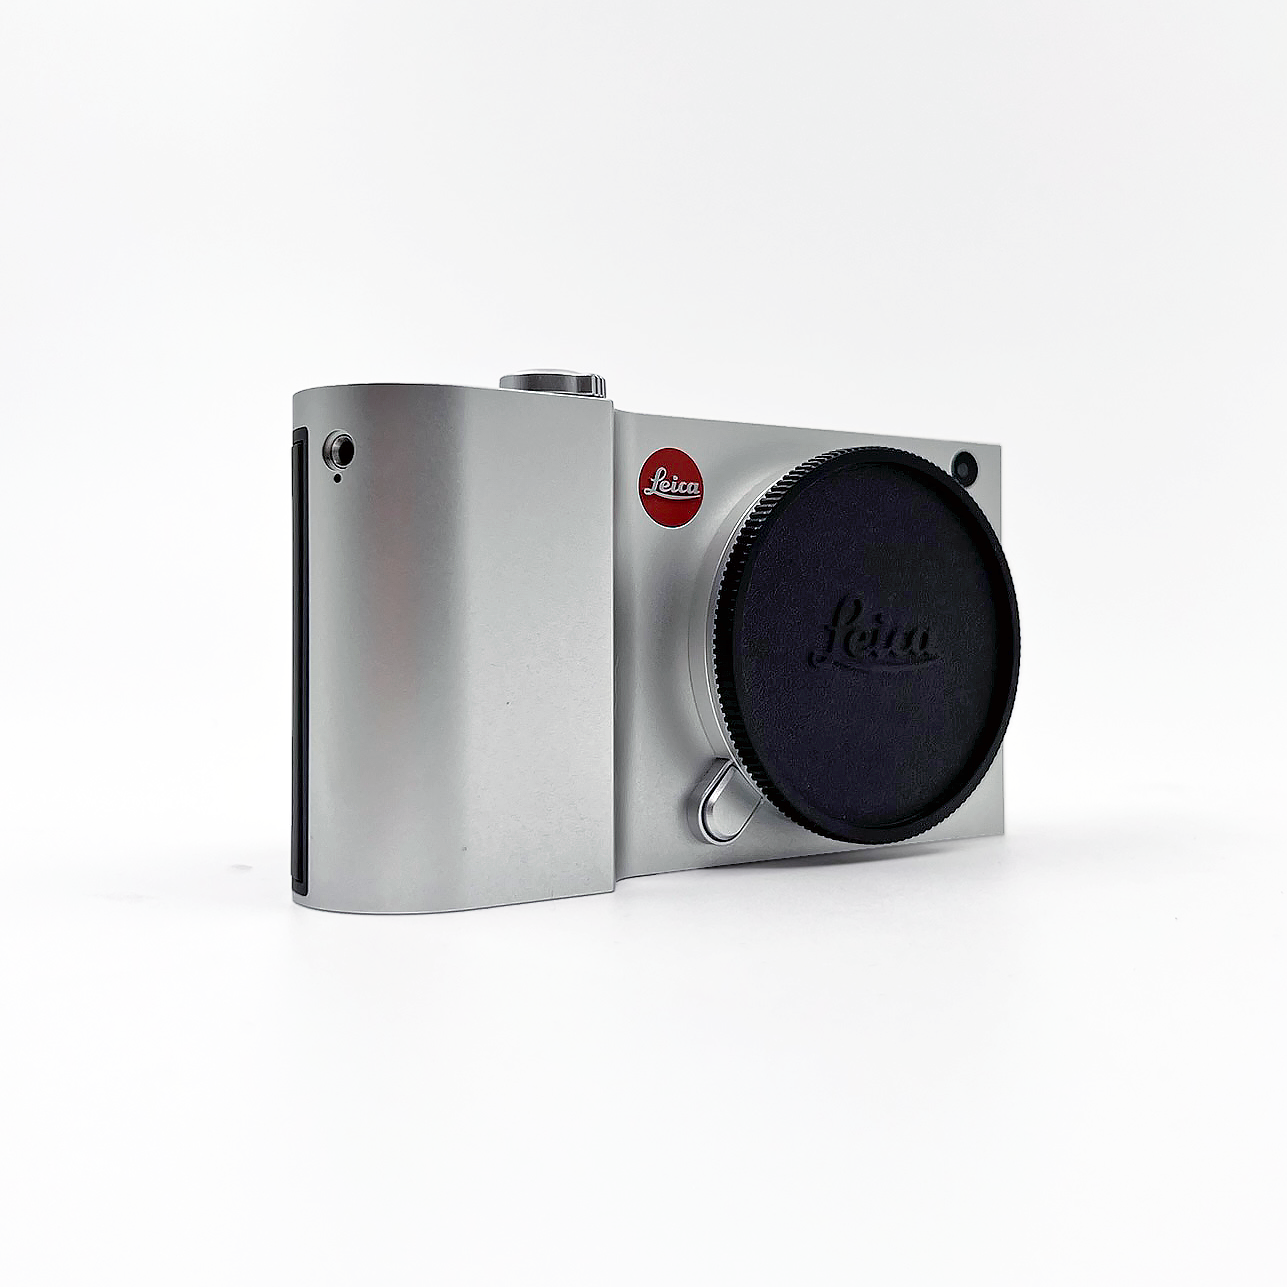 Leica 018-181 T 16 MP Mirrorless Digital Camera with 3.7-Inch LCD Silver, Anodized Aluminum - image 1 of 4